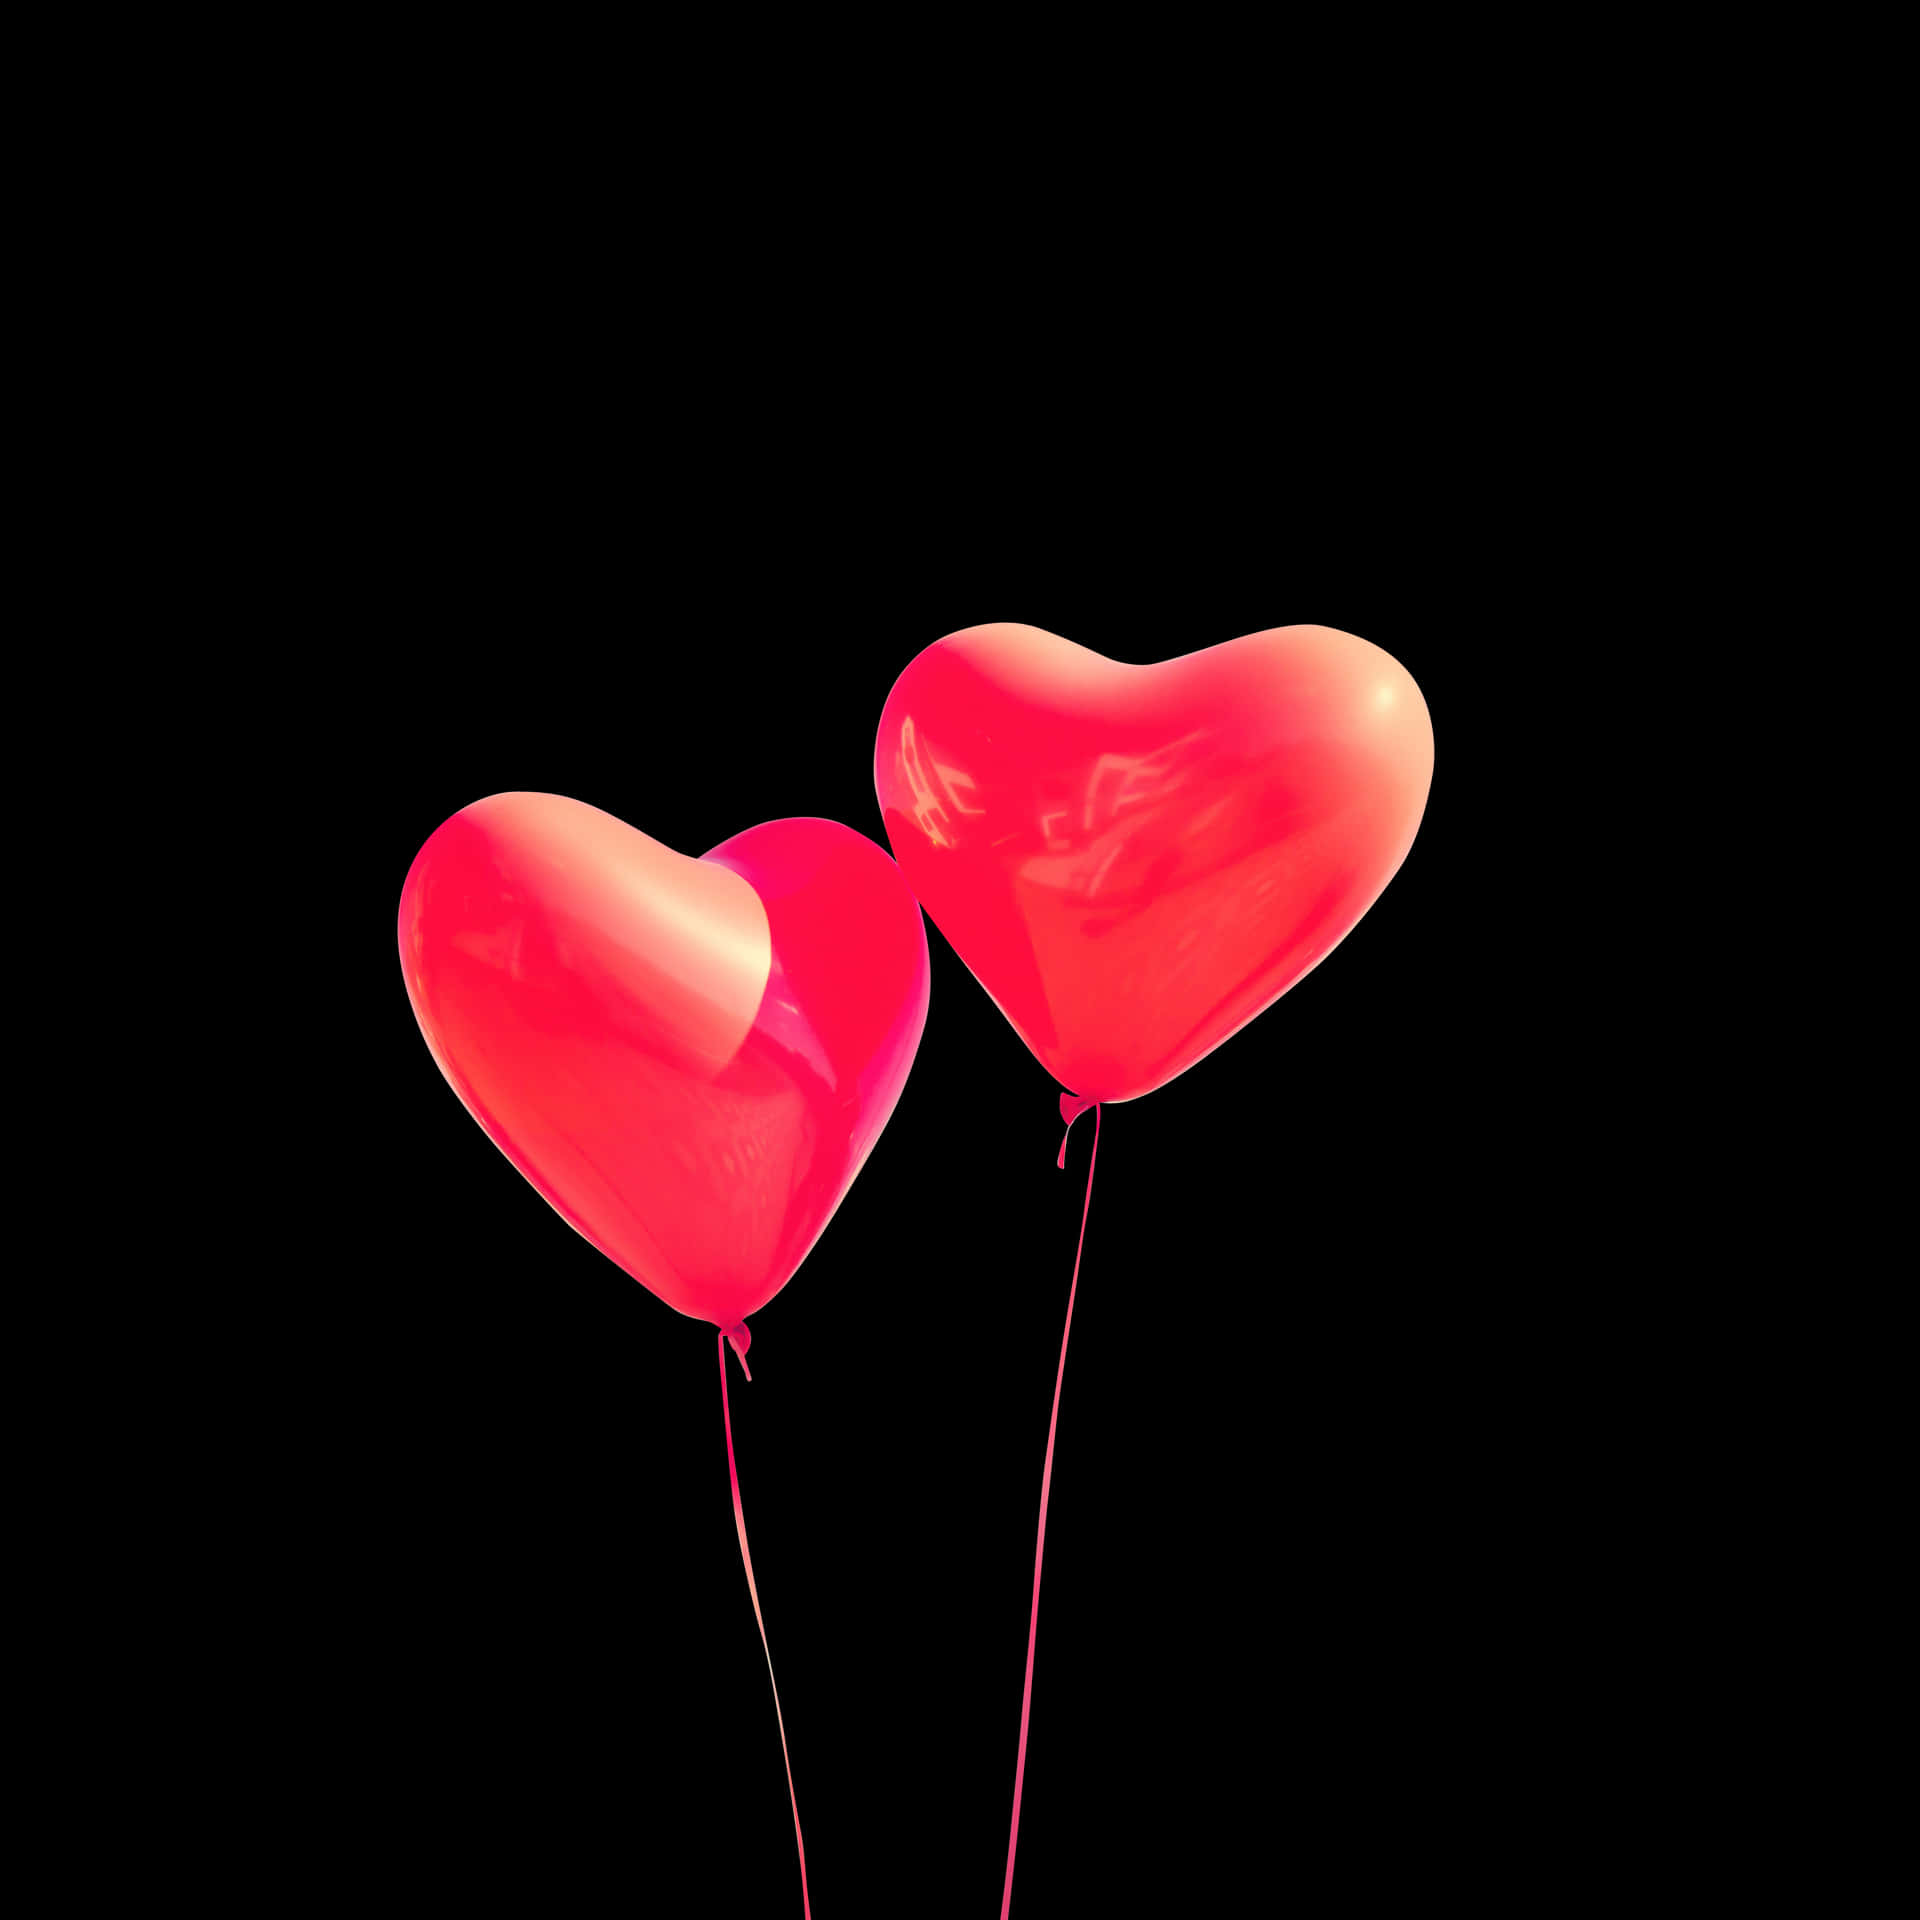 Heart Shaped Balloonson Black Background PNG